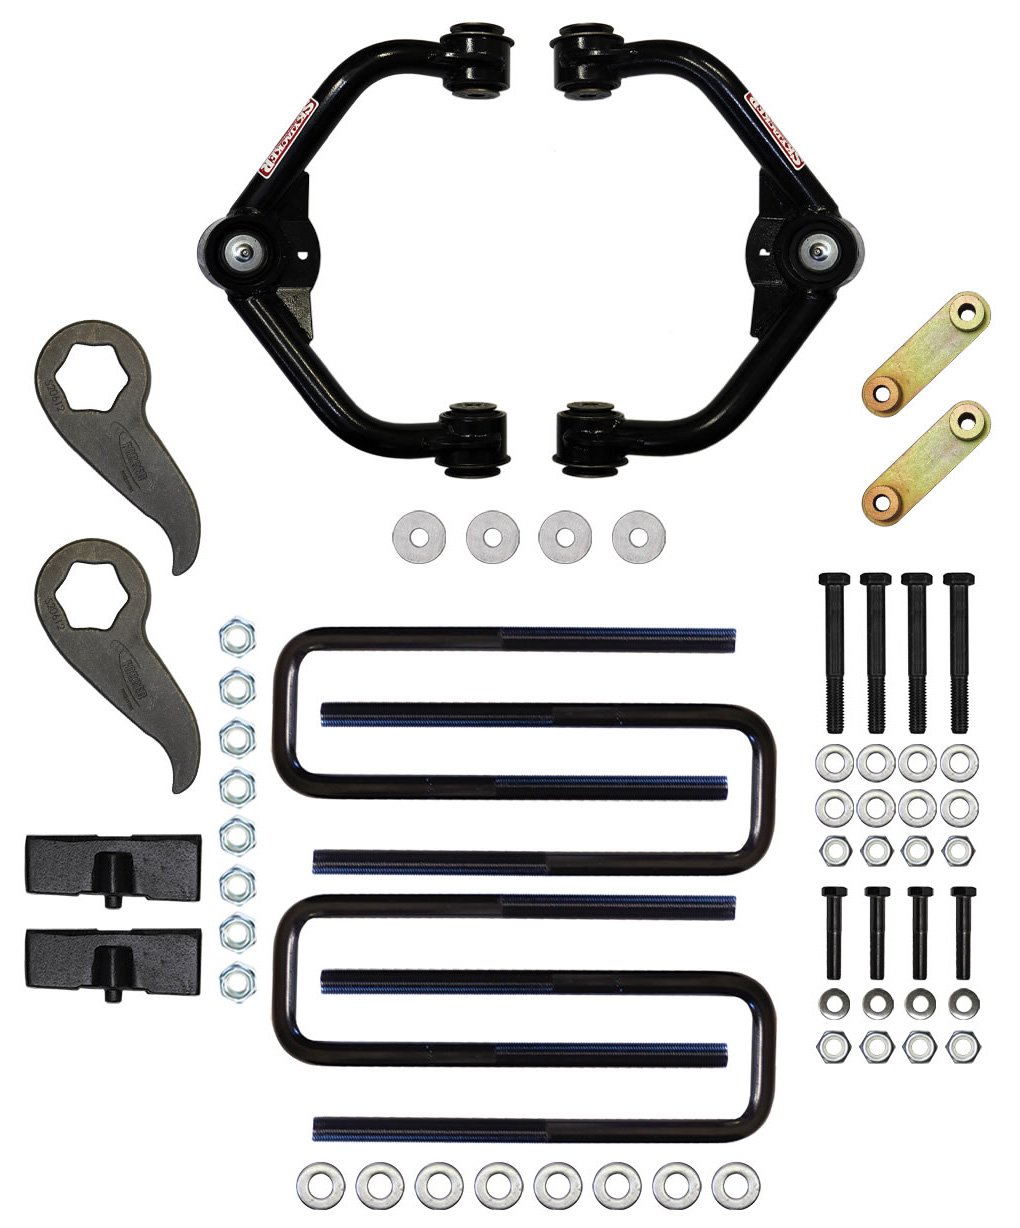 3.0-3.5 in. Lift Kit Component Box for Select GM Trucks [Without Shocks]